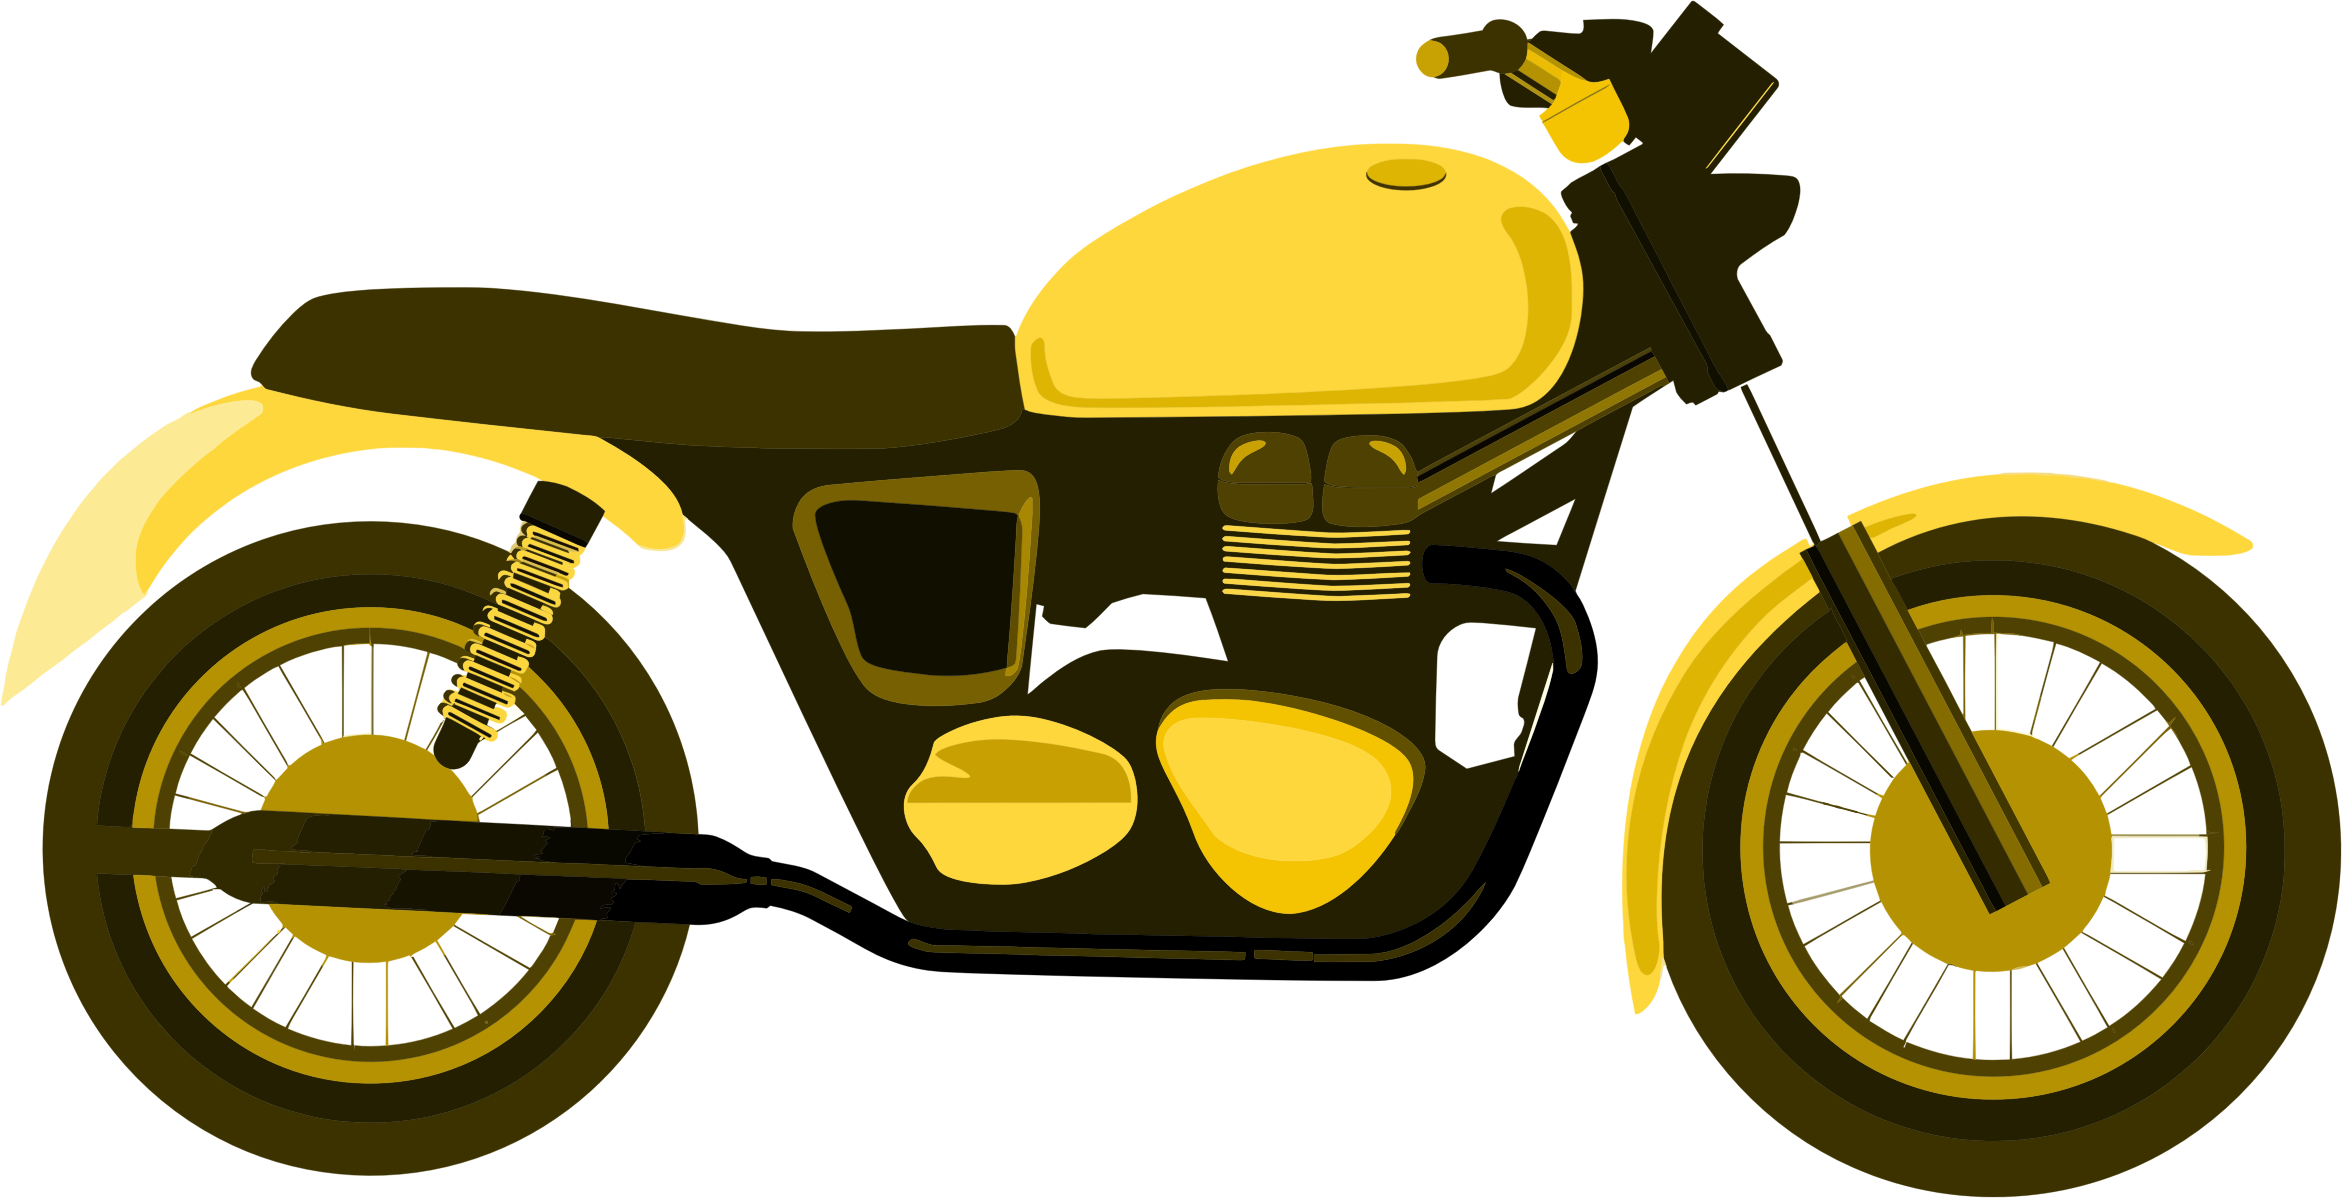 Woman on motorcycle free transparent background clipart